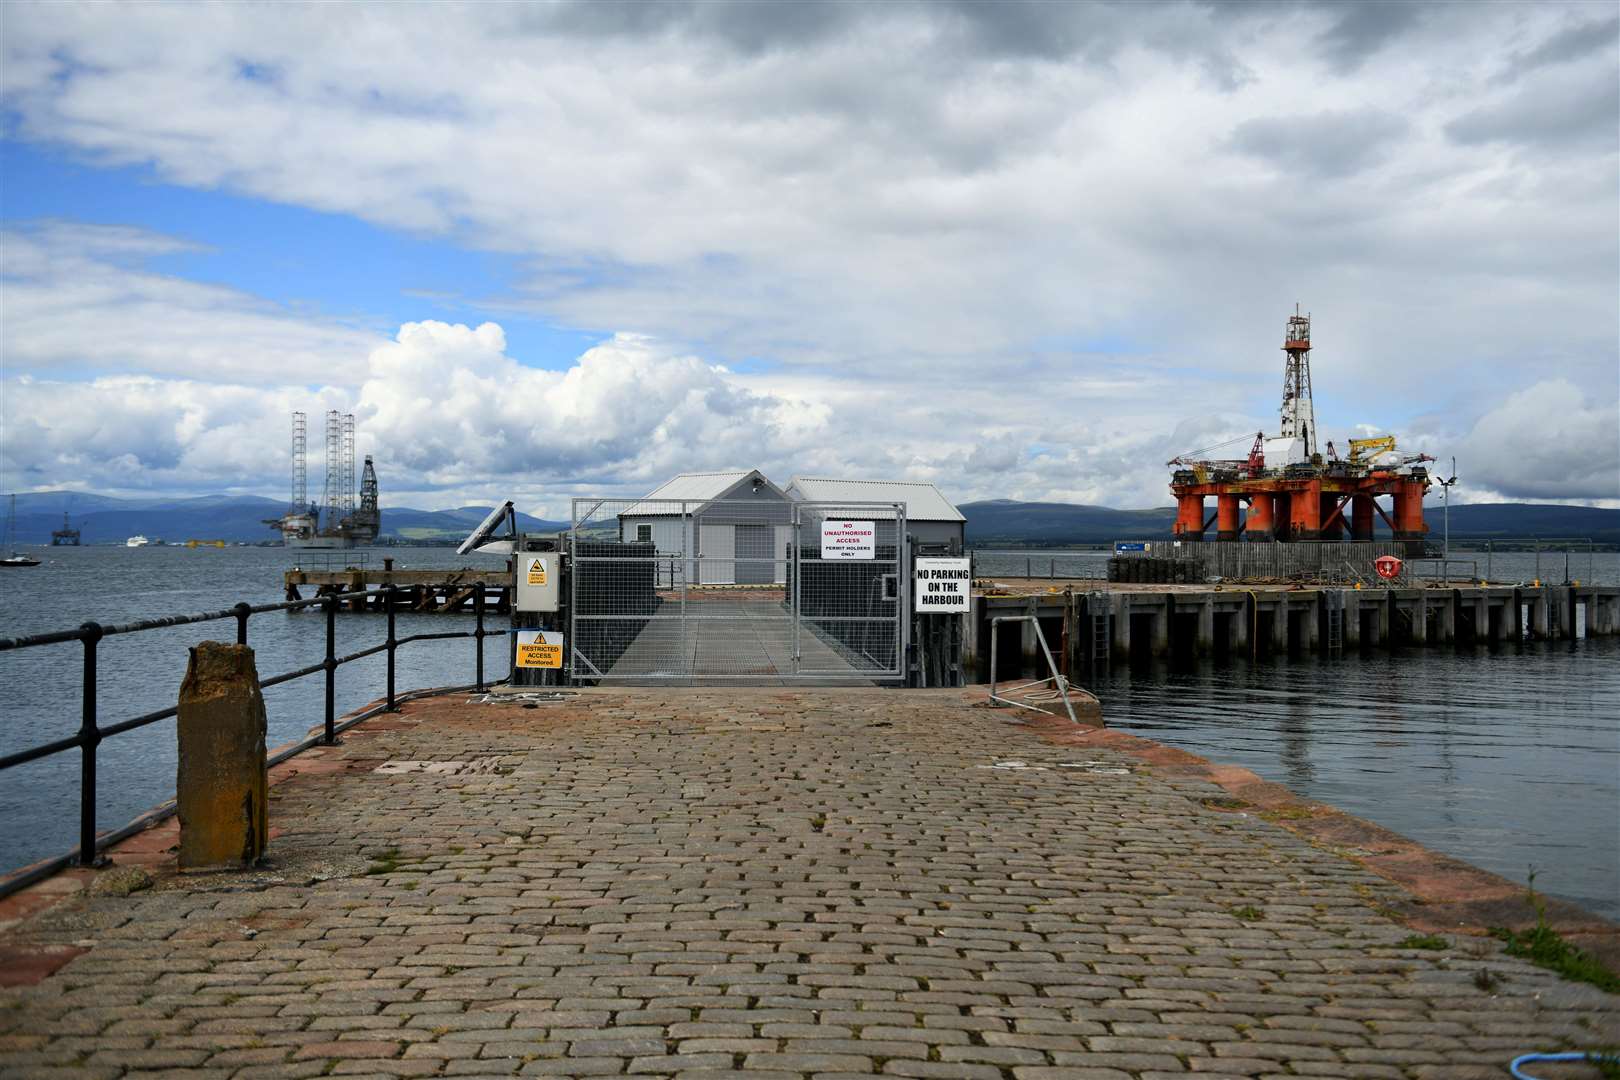 A gate at the Cromarty Harbour has been put in place to restrict access.